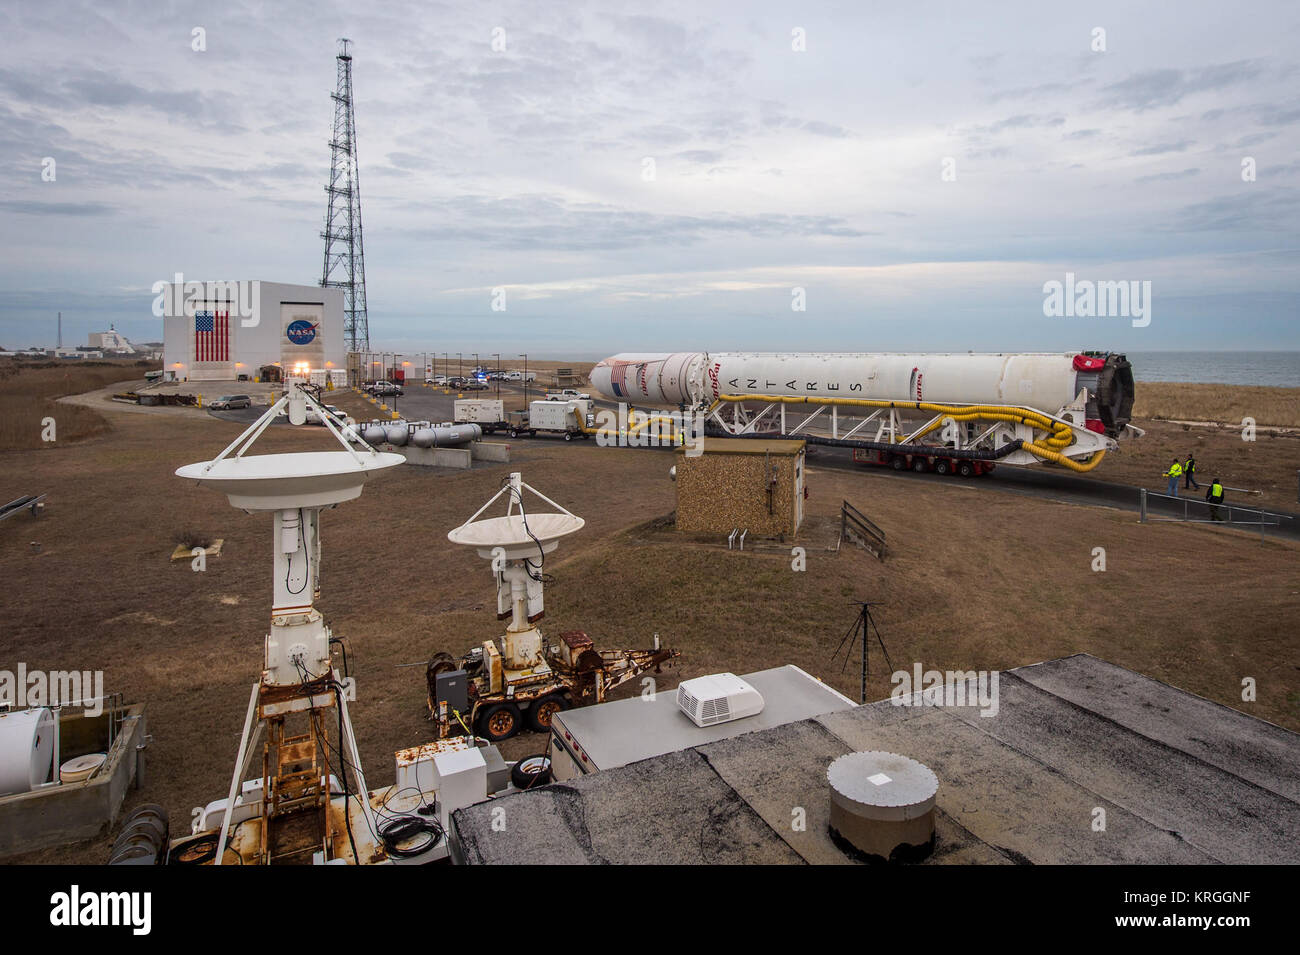 An Orbital Sciences Corporation Antares rocket is seen as it is rolled out to launch Pad-0A at NASA's Wallops Flight Facility, Sunday, January 5, 2014 in advance of a planned Wednesday, Jan. 8th, 1:32 p.m. EST launch, Wallops Island, VA. The Antares will launch a Cygnus spacecraft on a cargo resupply mission to the International Space Station. The Orbital-1 mission is Orbital Sciences' first contracted cargo delivery flight to the space station for NASA. Among the cargo aboard Cygnus set to launch to the space station are science experiments, crew provisions, spare parts and other hardware. Ph Stock Photo